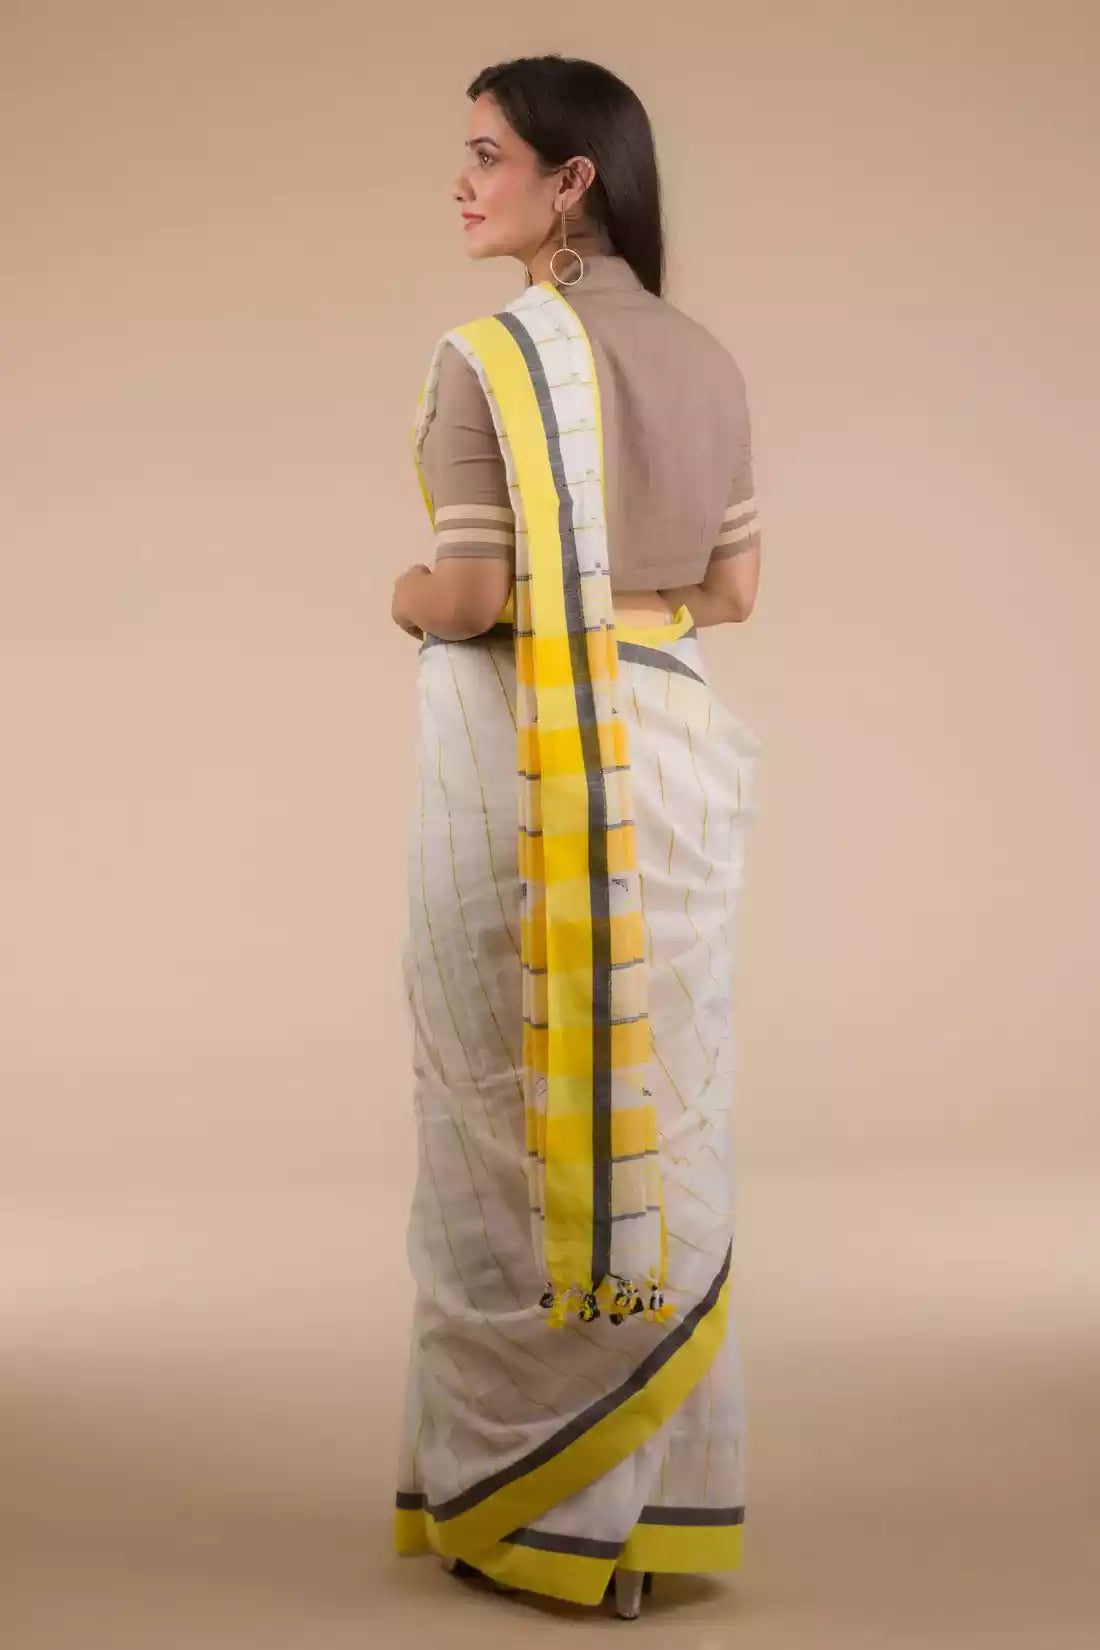 a side view of a  woman in a white and yellow border saree standing in front of a beige backdrop